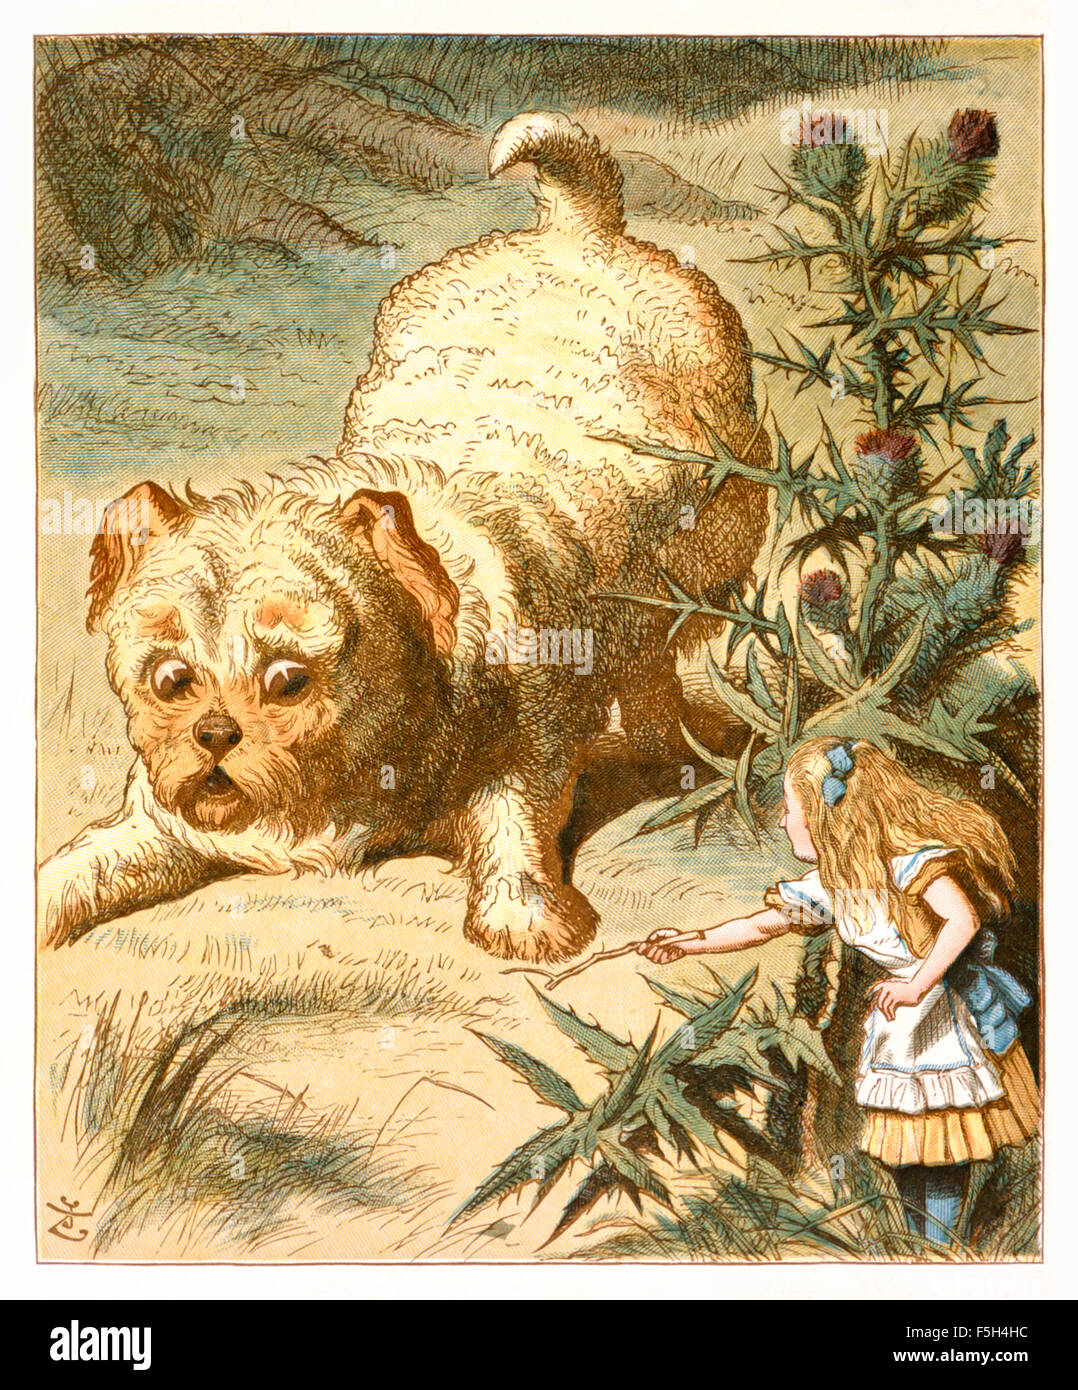 The dear little puppy from 'The Nursery “Alice'', an shortened adaptation of ‘Alice’s Adventures in Wonderland’ aimed at under-fives written by Lewis Carroll (1832-1898) himself. This edition contains 20 selected illustrations by Sir John Tenniel (1820-1914) from the original book which were enlarged and coloured by Emily Gertrude Thomson (1850-1929). See description for more information. Stock Photo